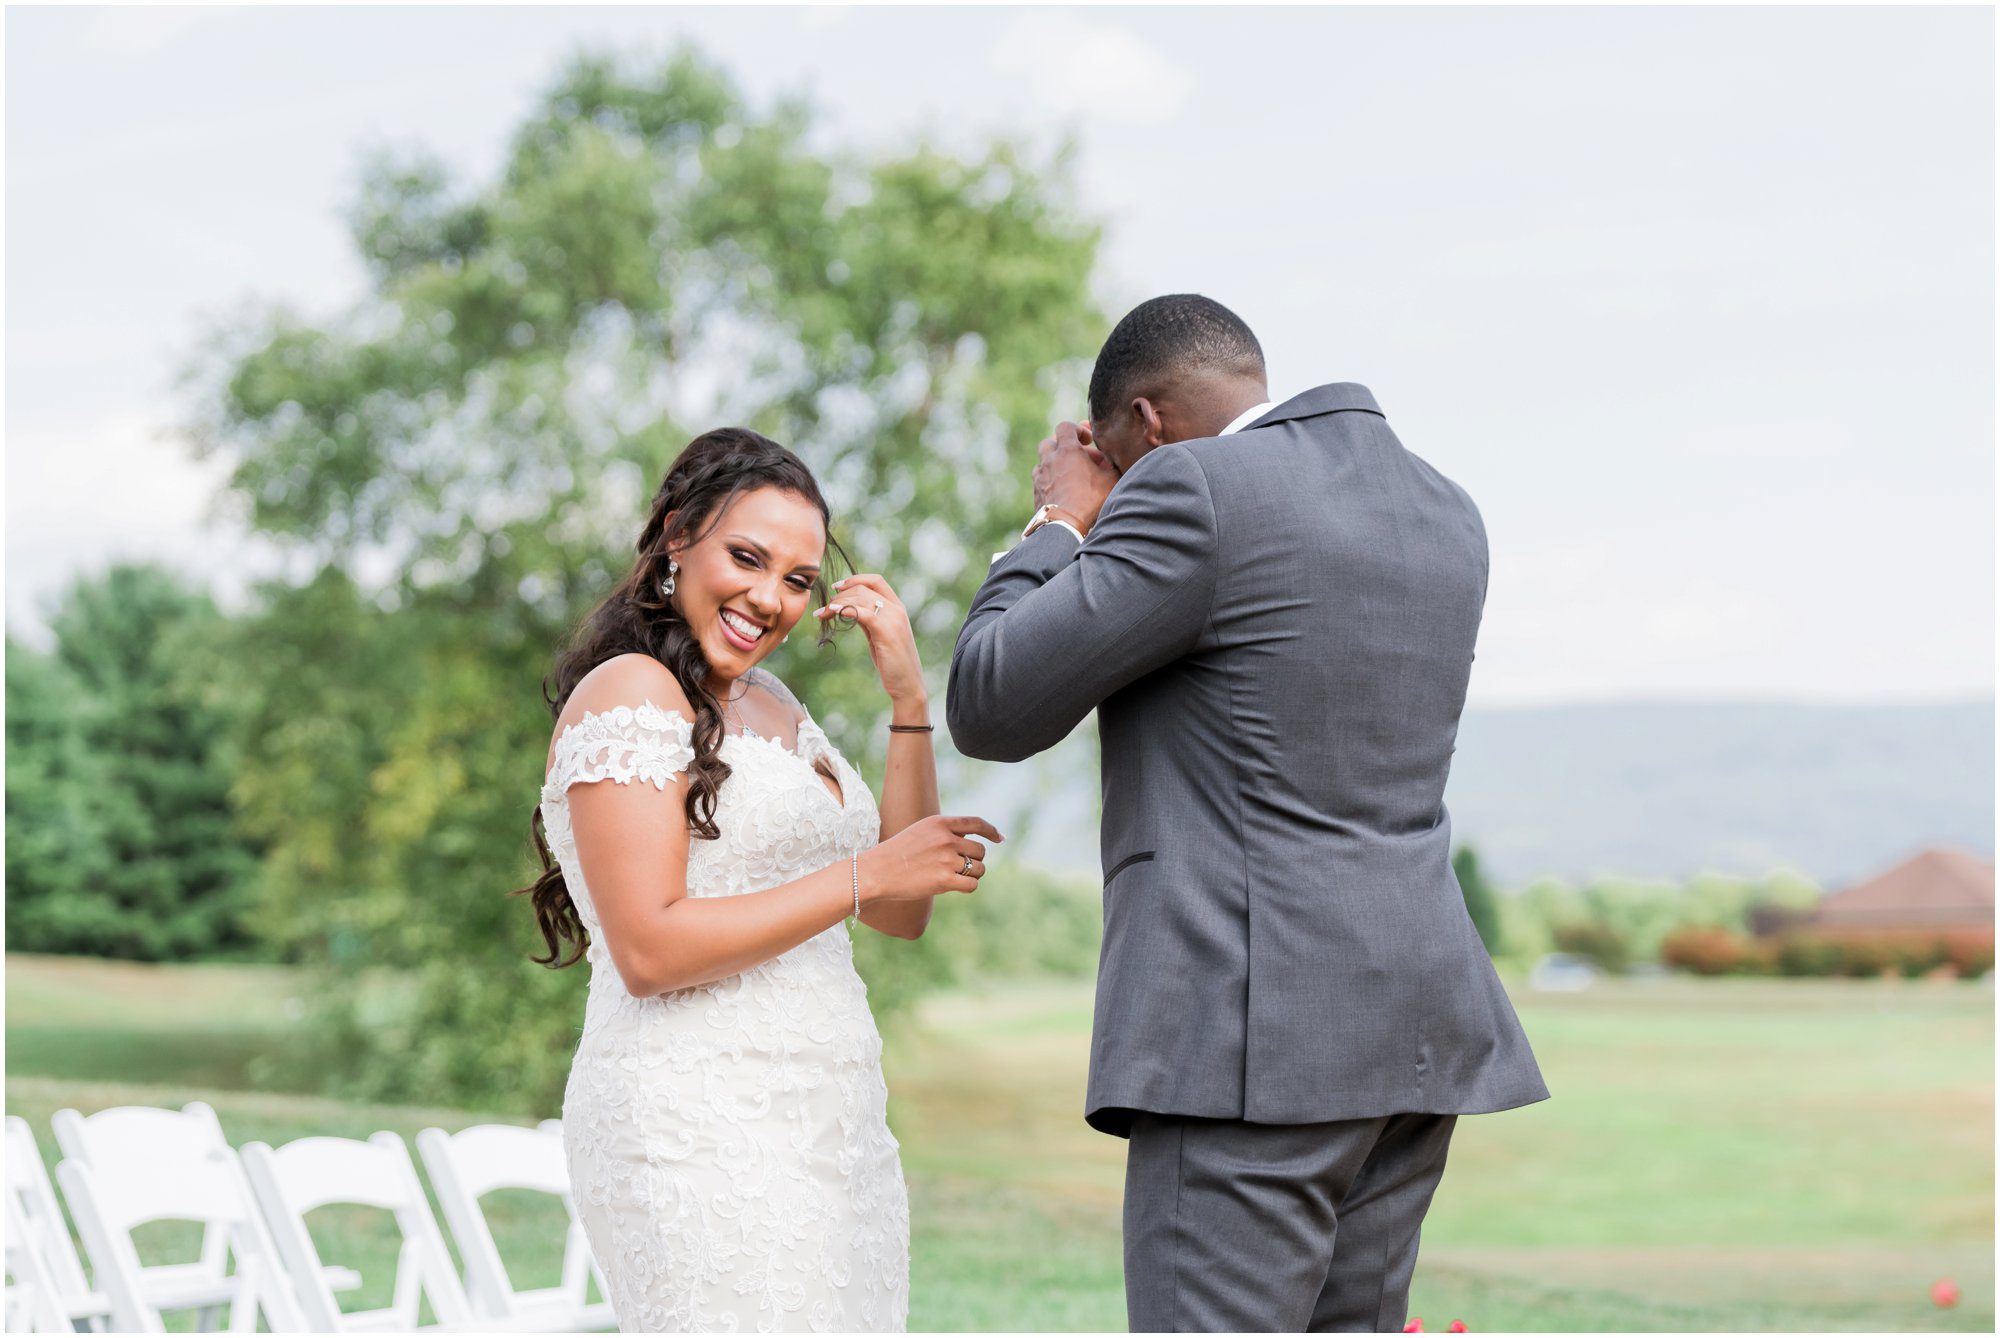 Aireannah & Marquis Bowling Green Country Club Front Royal Franzi Lee Photography-2670.jpg